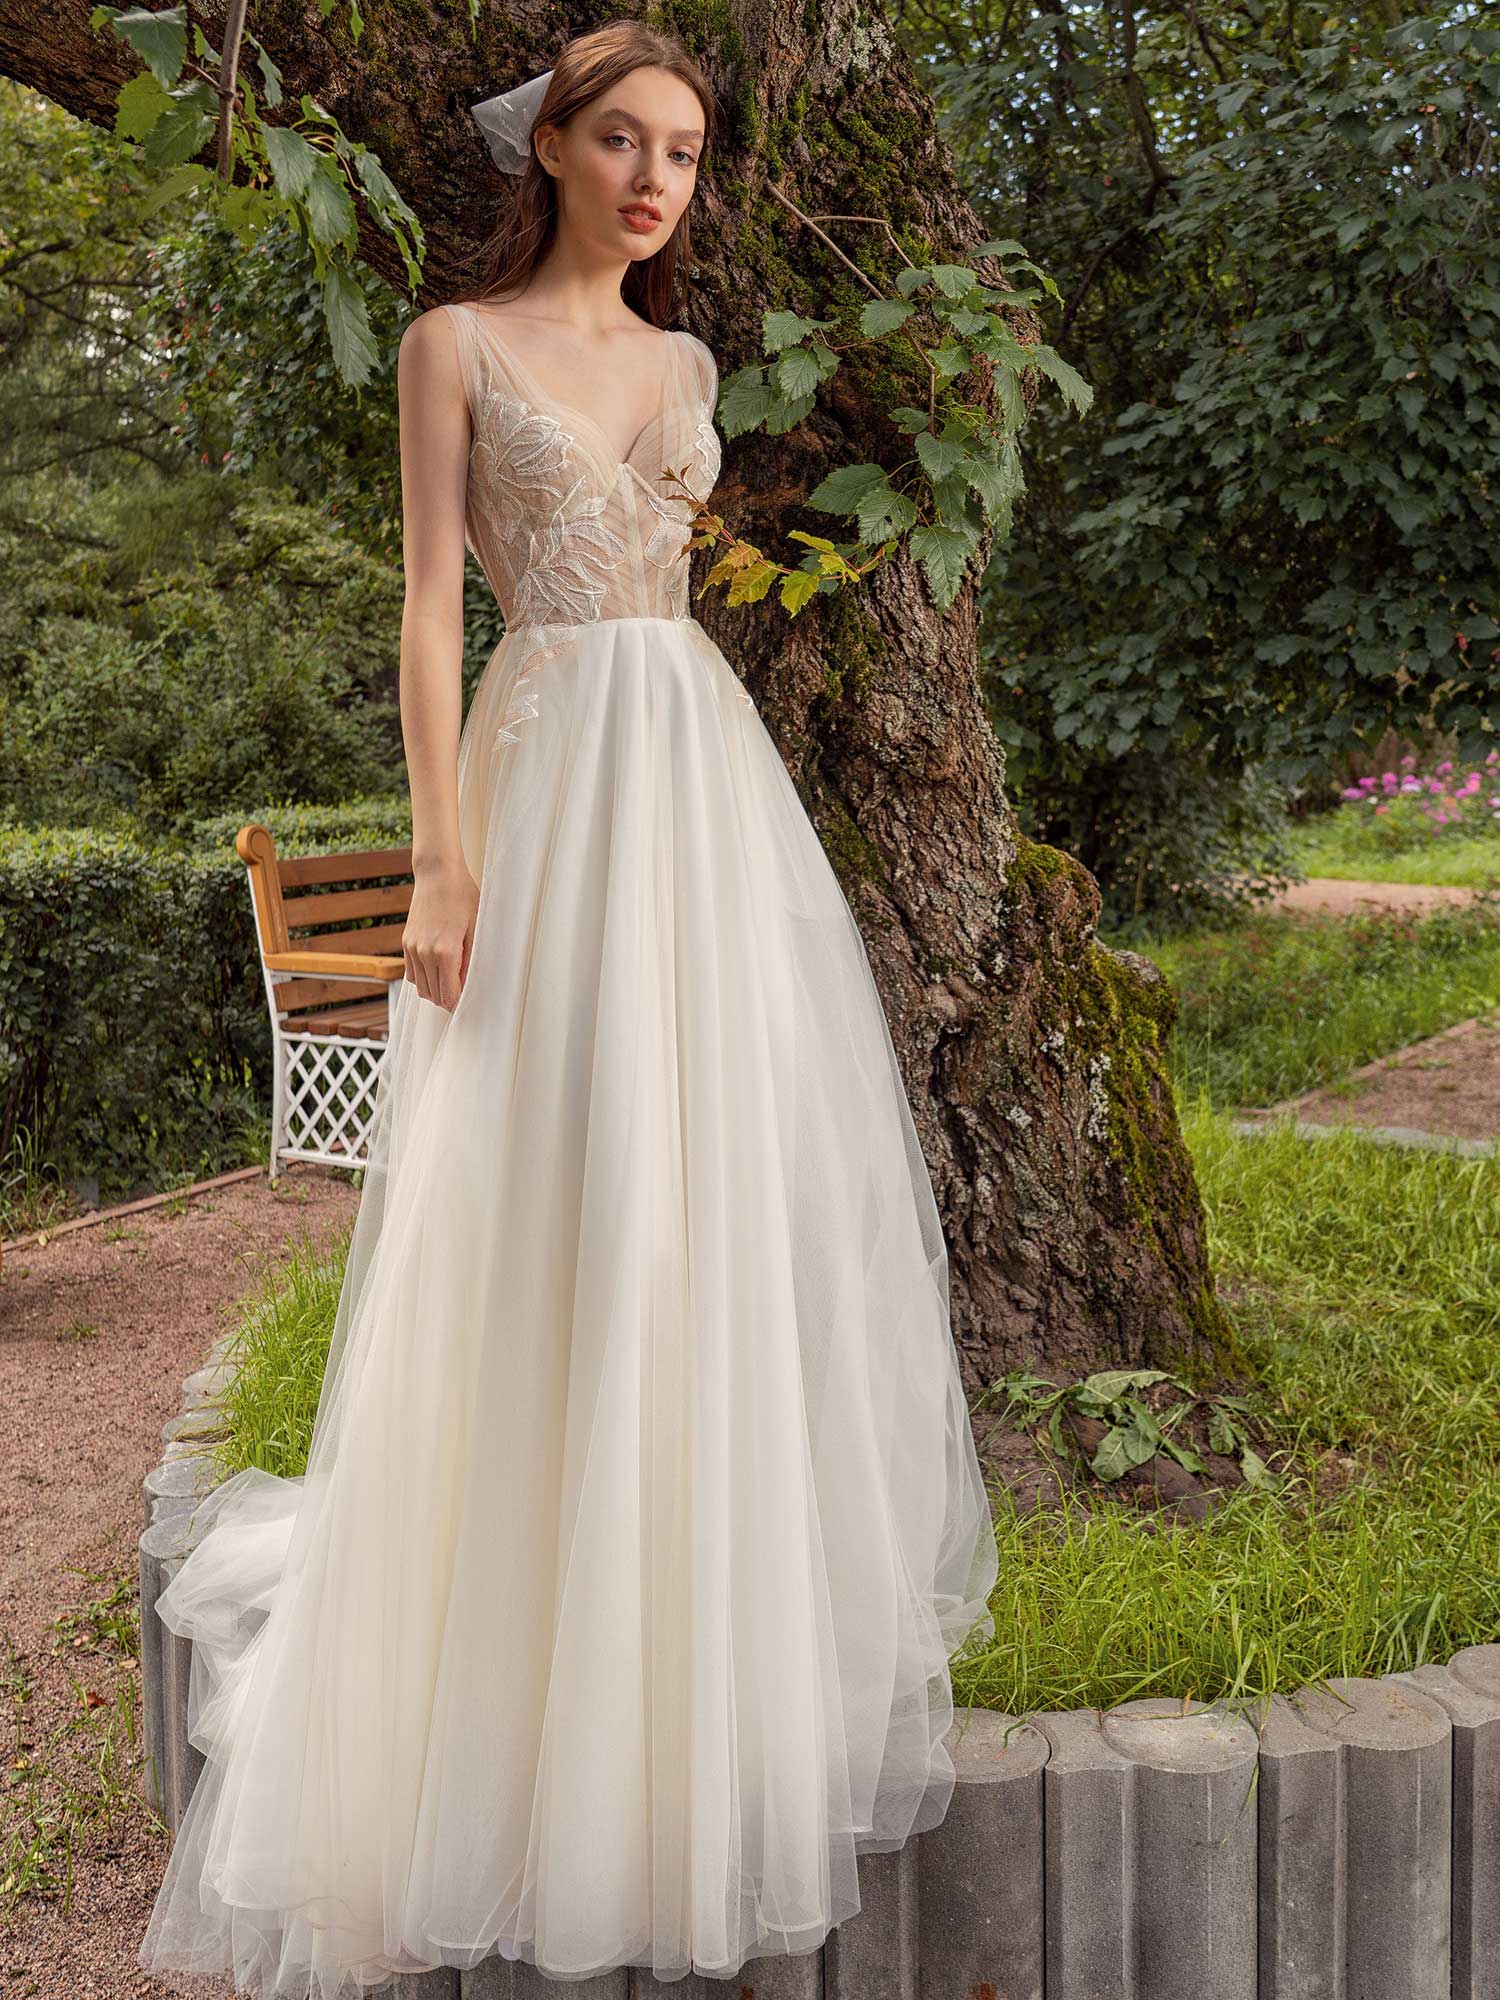 Wedding dress with bustier bodice and floral embroidery